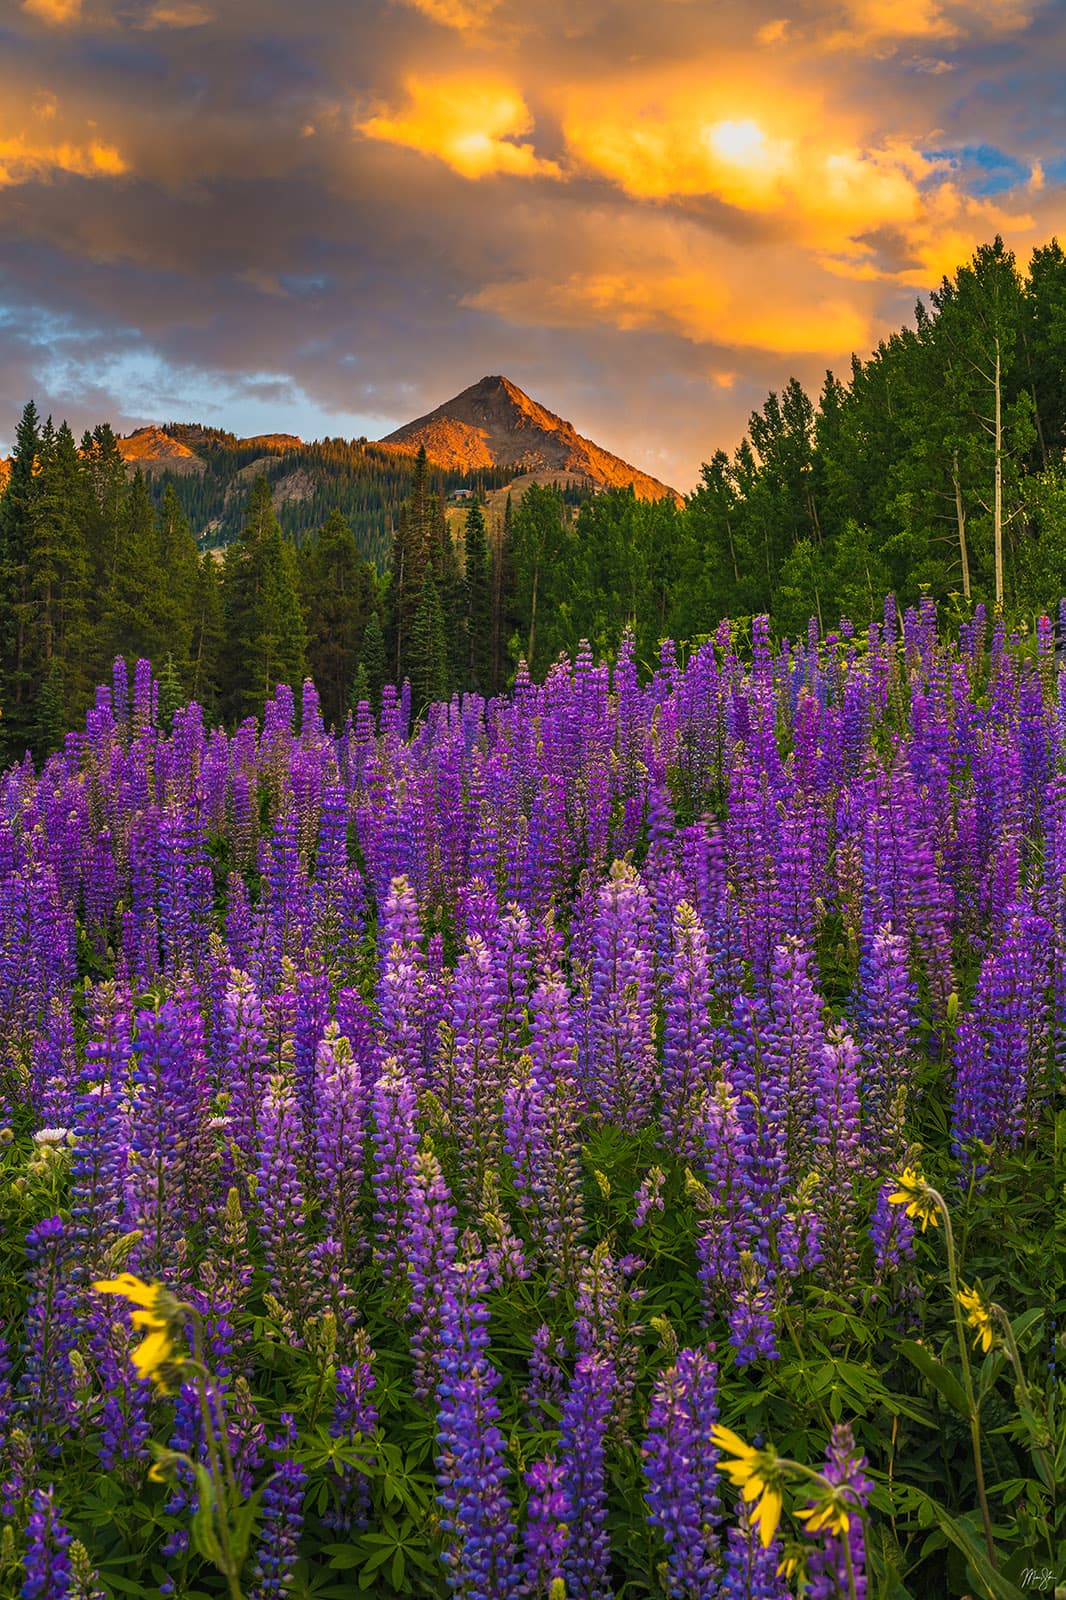 Wildflower Sunset over Mt Crested Butte - Crested Butte, Colorado